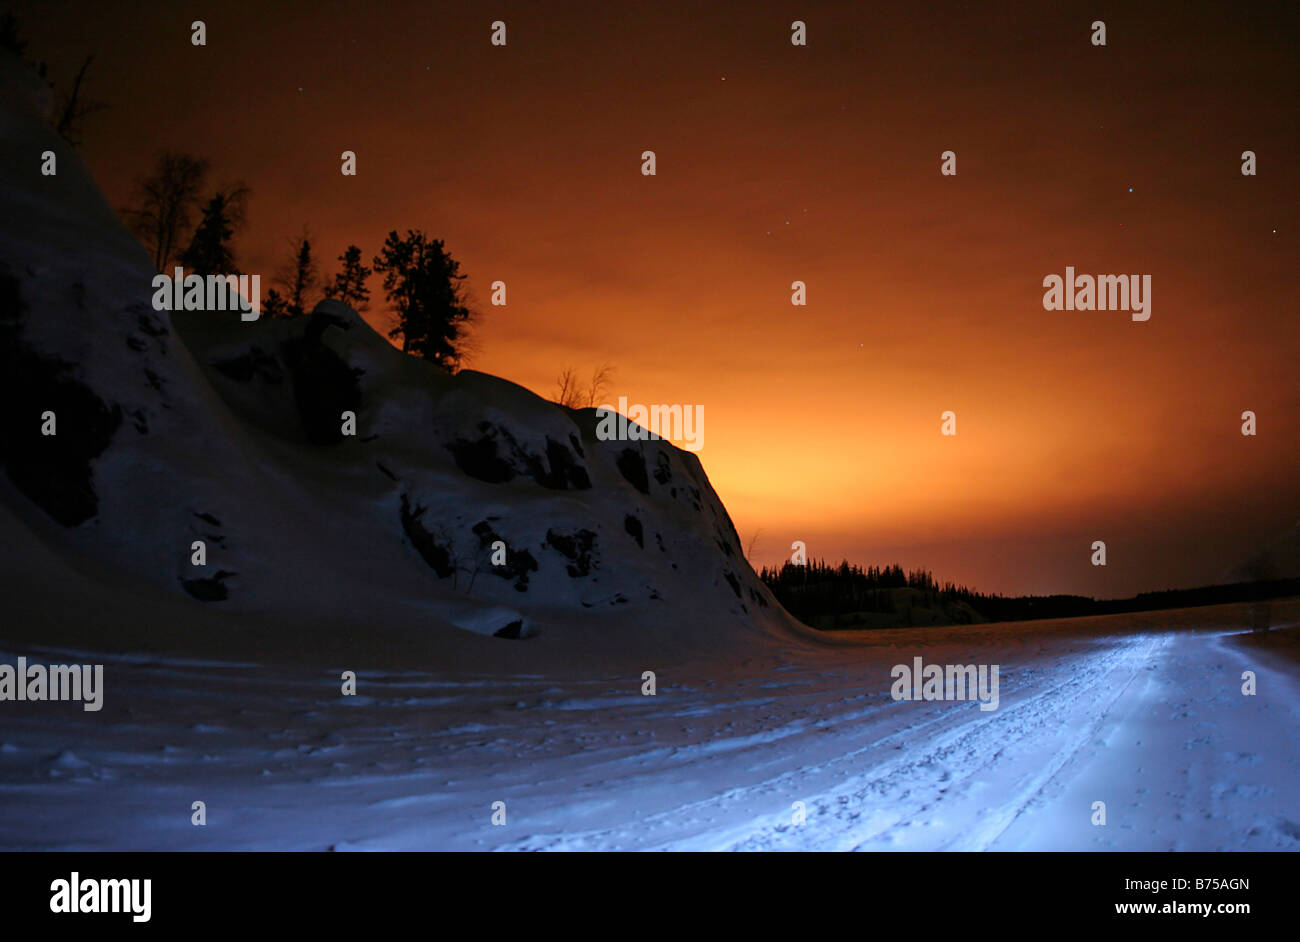 Reddish glow of the nearby city of Yellowknife in winter, Northwest Territories, Canada Stock Photo